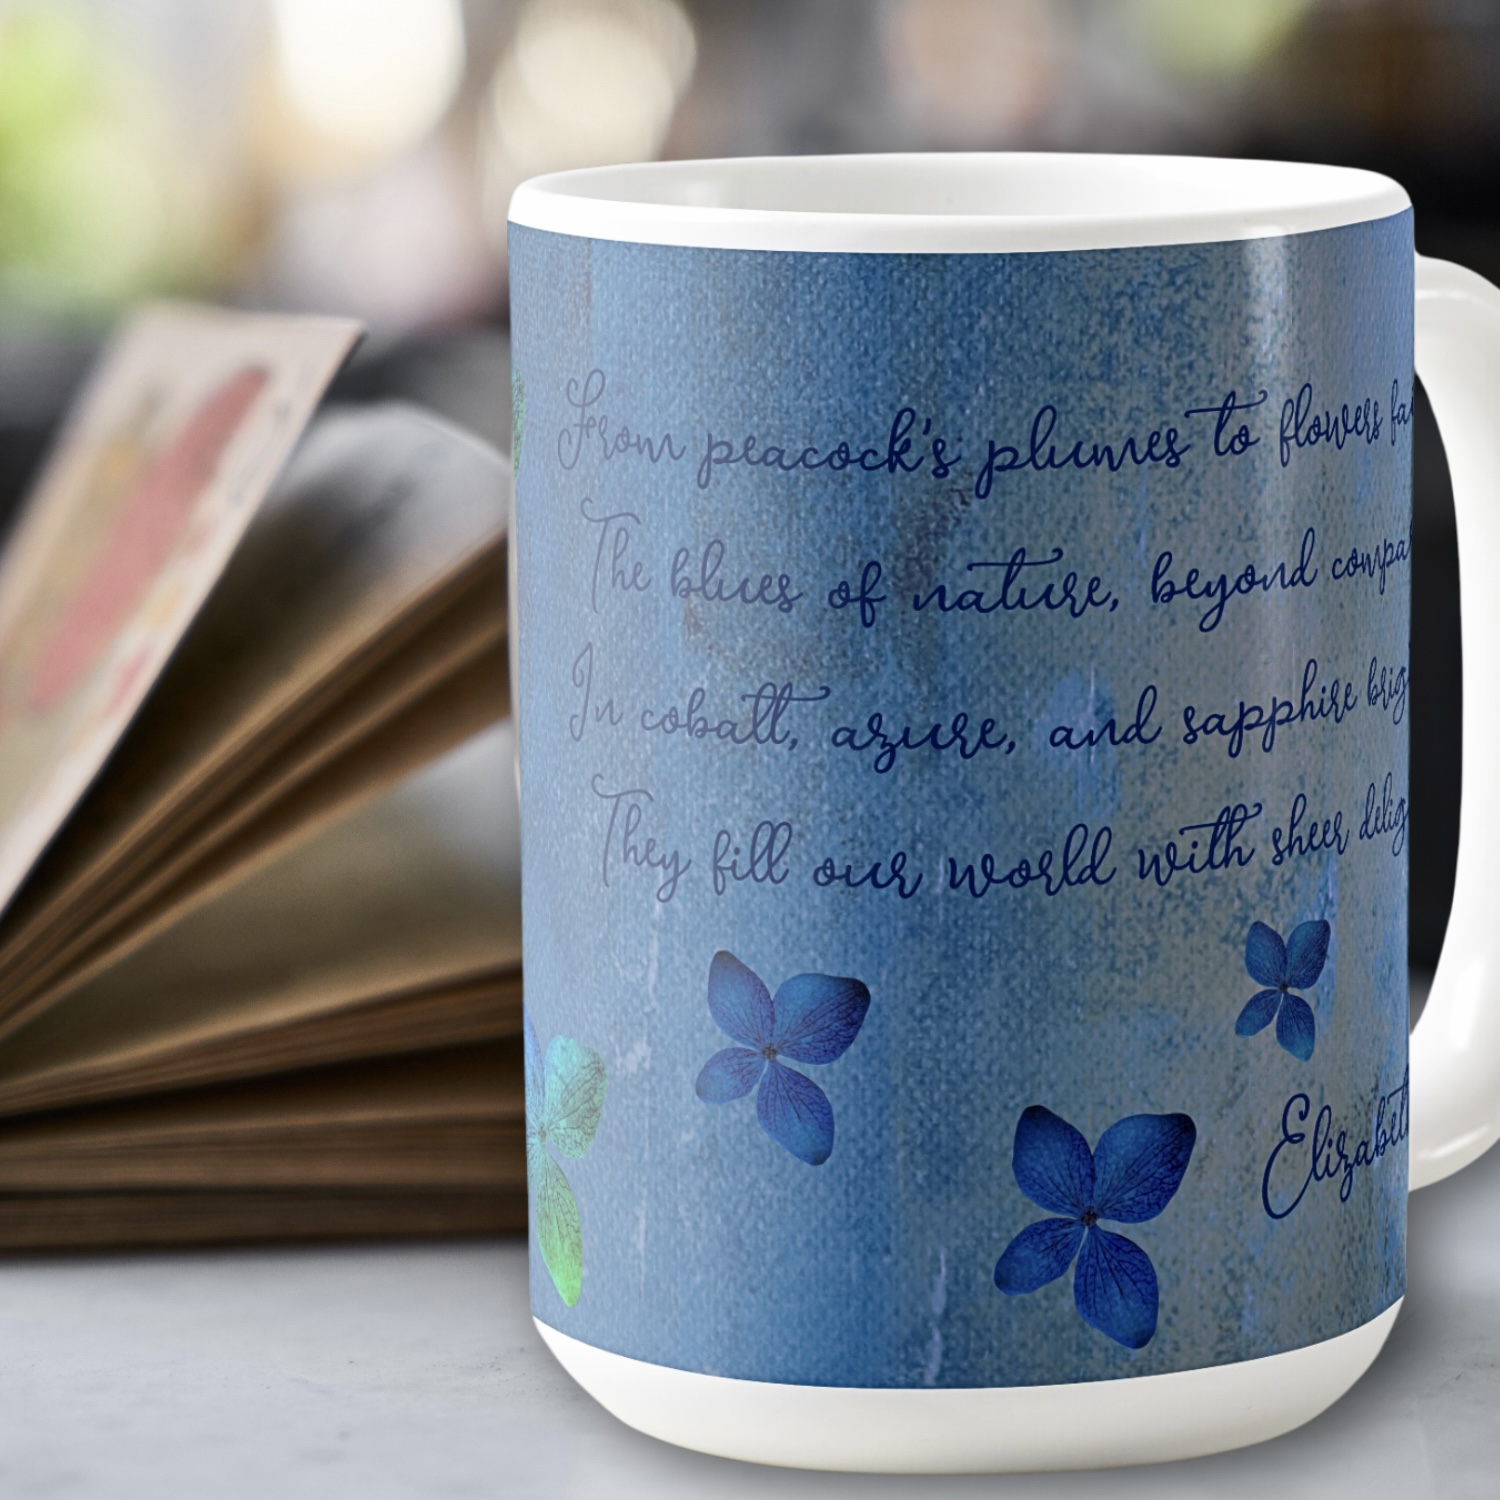 Side view of a coffee mug showing an inspirational message and blue flowers against a washed out blue background.